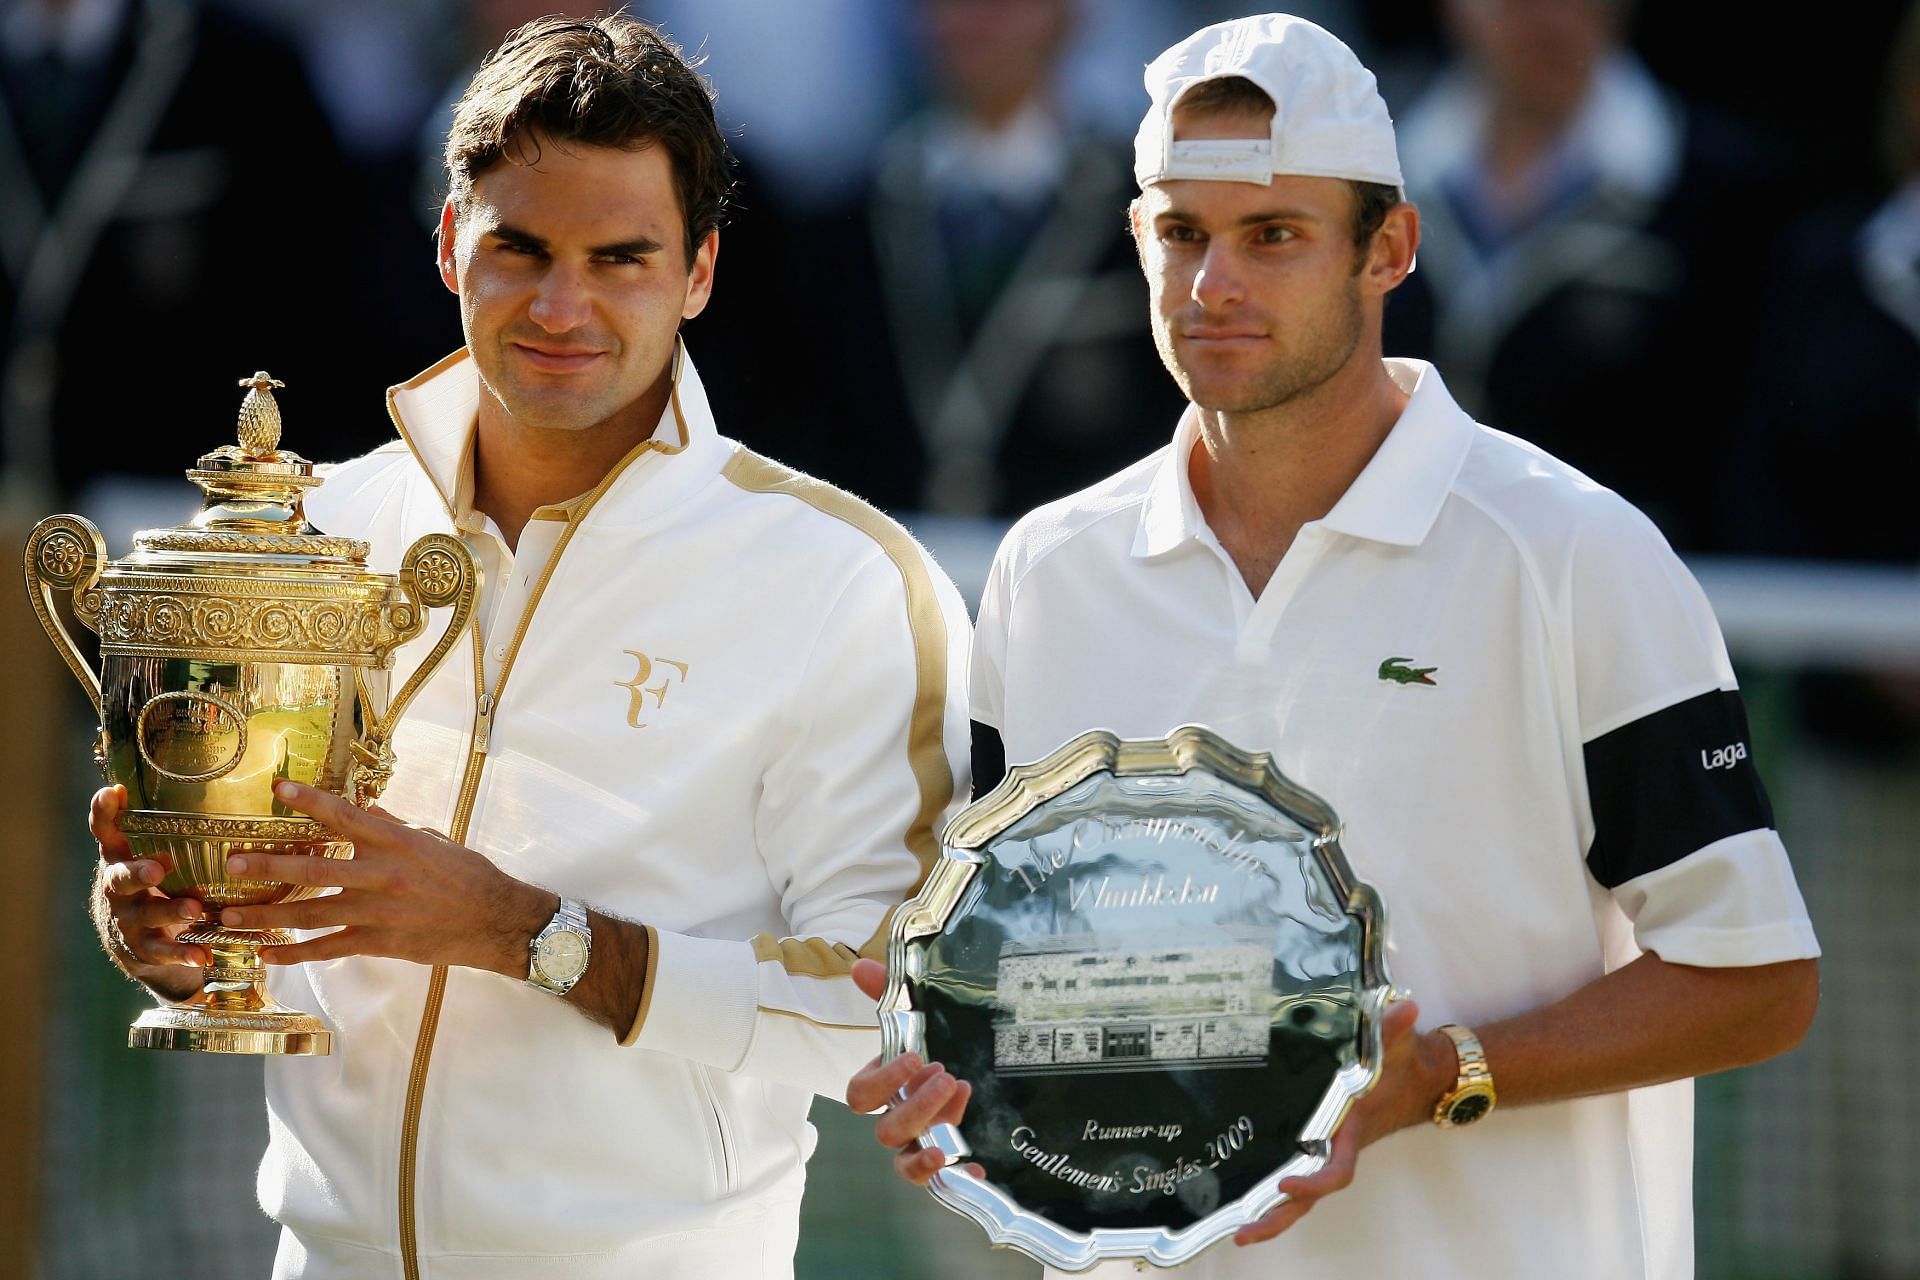 Andy Roddick lost to Roger Federer in an incredible five-setter at the 2009 Wimbledon final